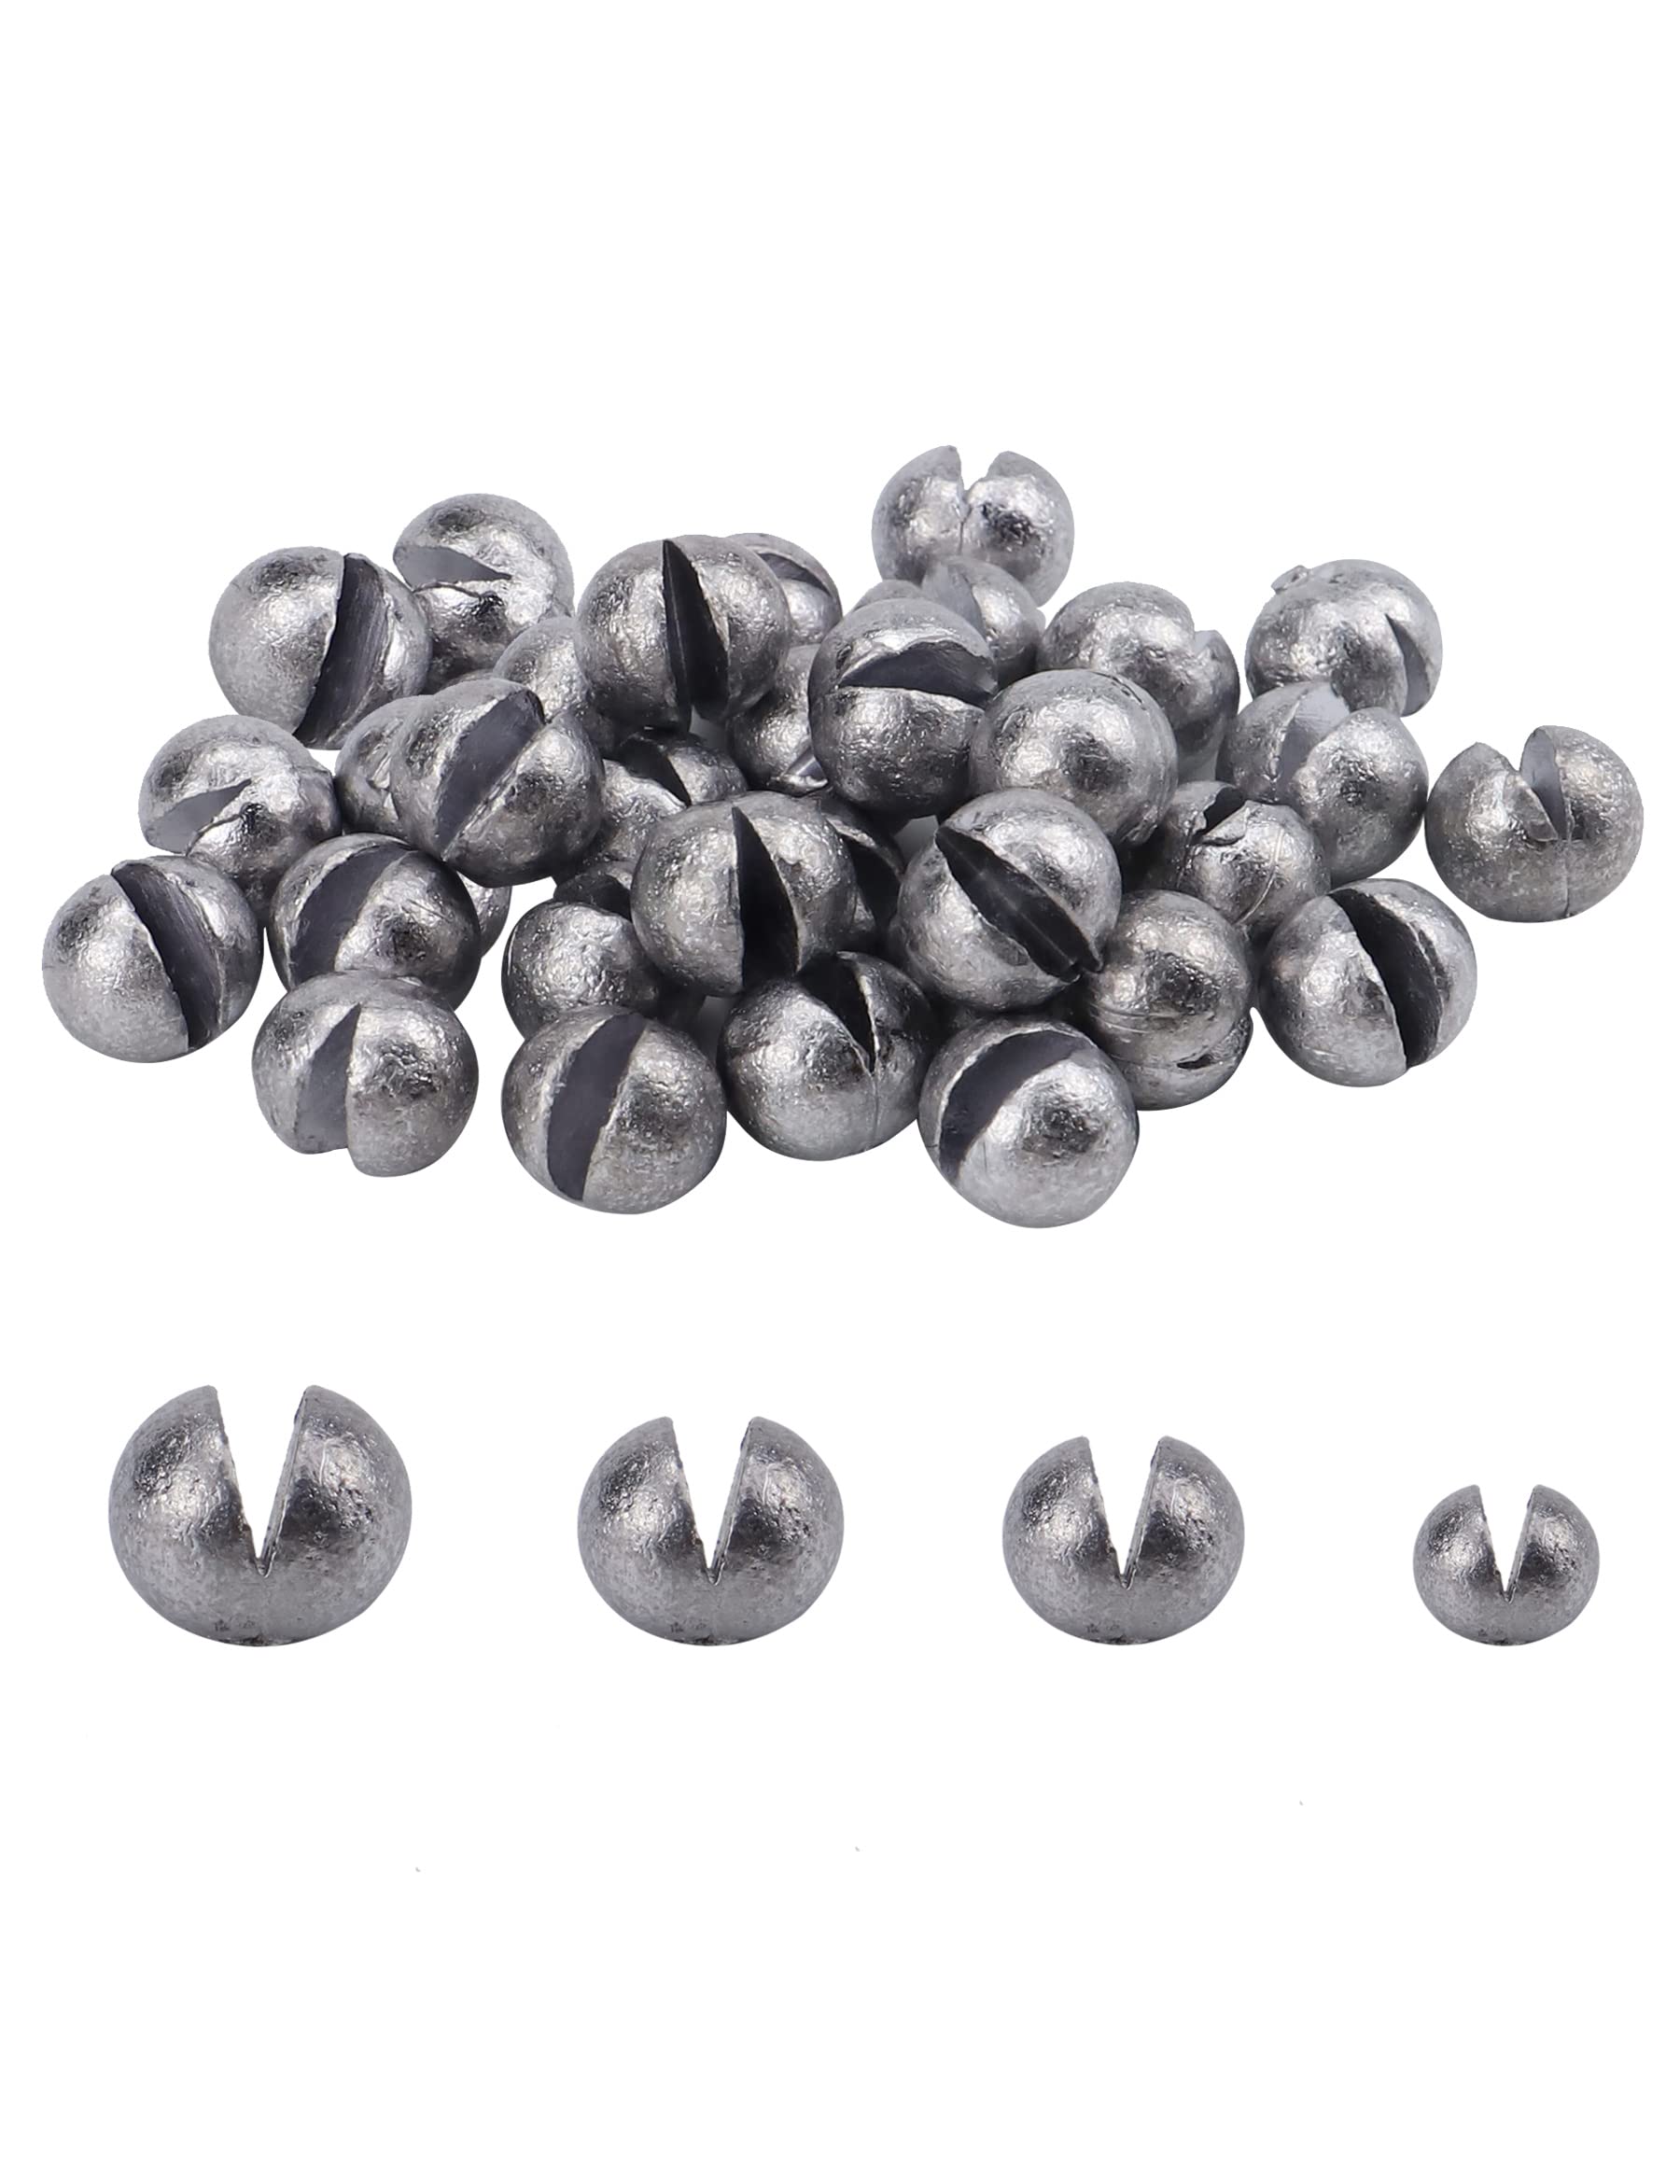 Avlcoaky Split Shot Fishing Weights 50 Pack Large Sinkers for Fishing Line  Removable Round Split Shot Sinkers Saltwater Freshwater -  0.15/0.25/0.35/0.5ounce 0.15 ounce, 50-Pack